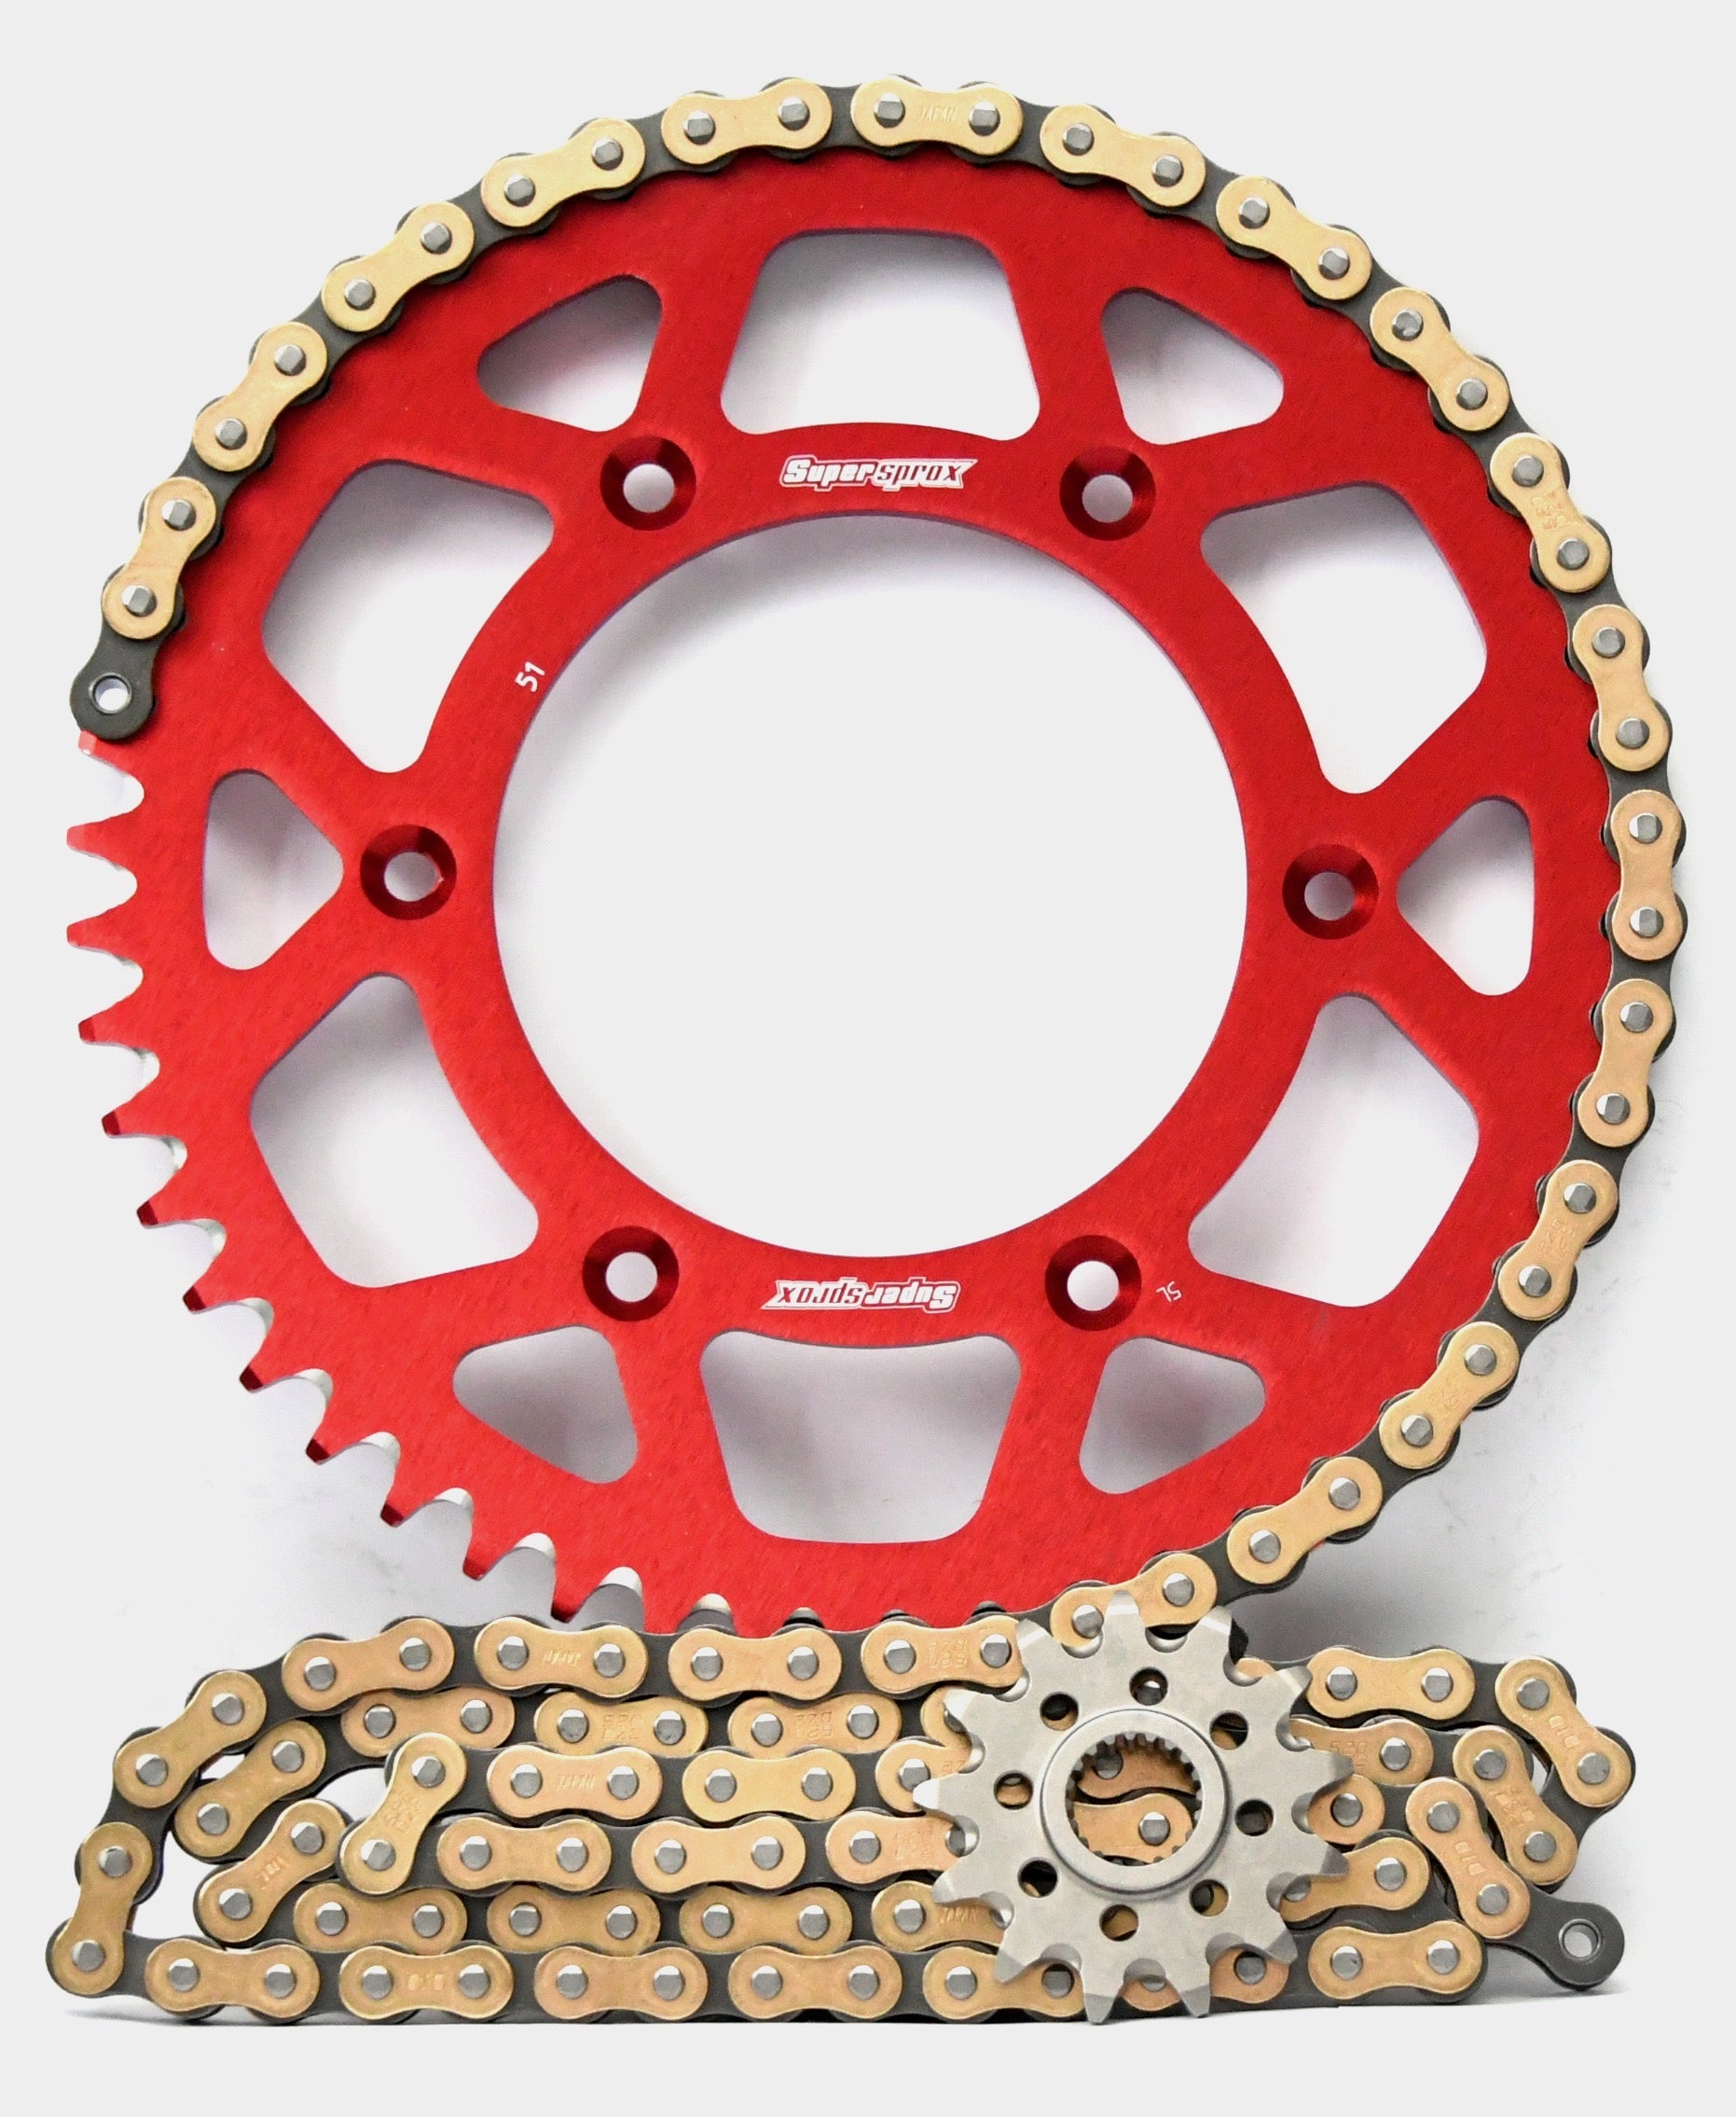 Supersprox Chain & Aluminium Sprocket Kit for Honda CR125R 2004-2007 - Choose Your Gearing